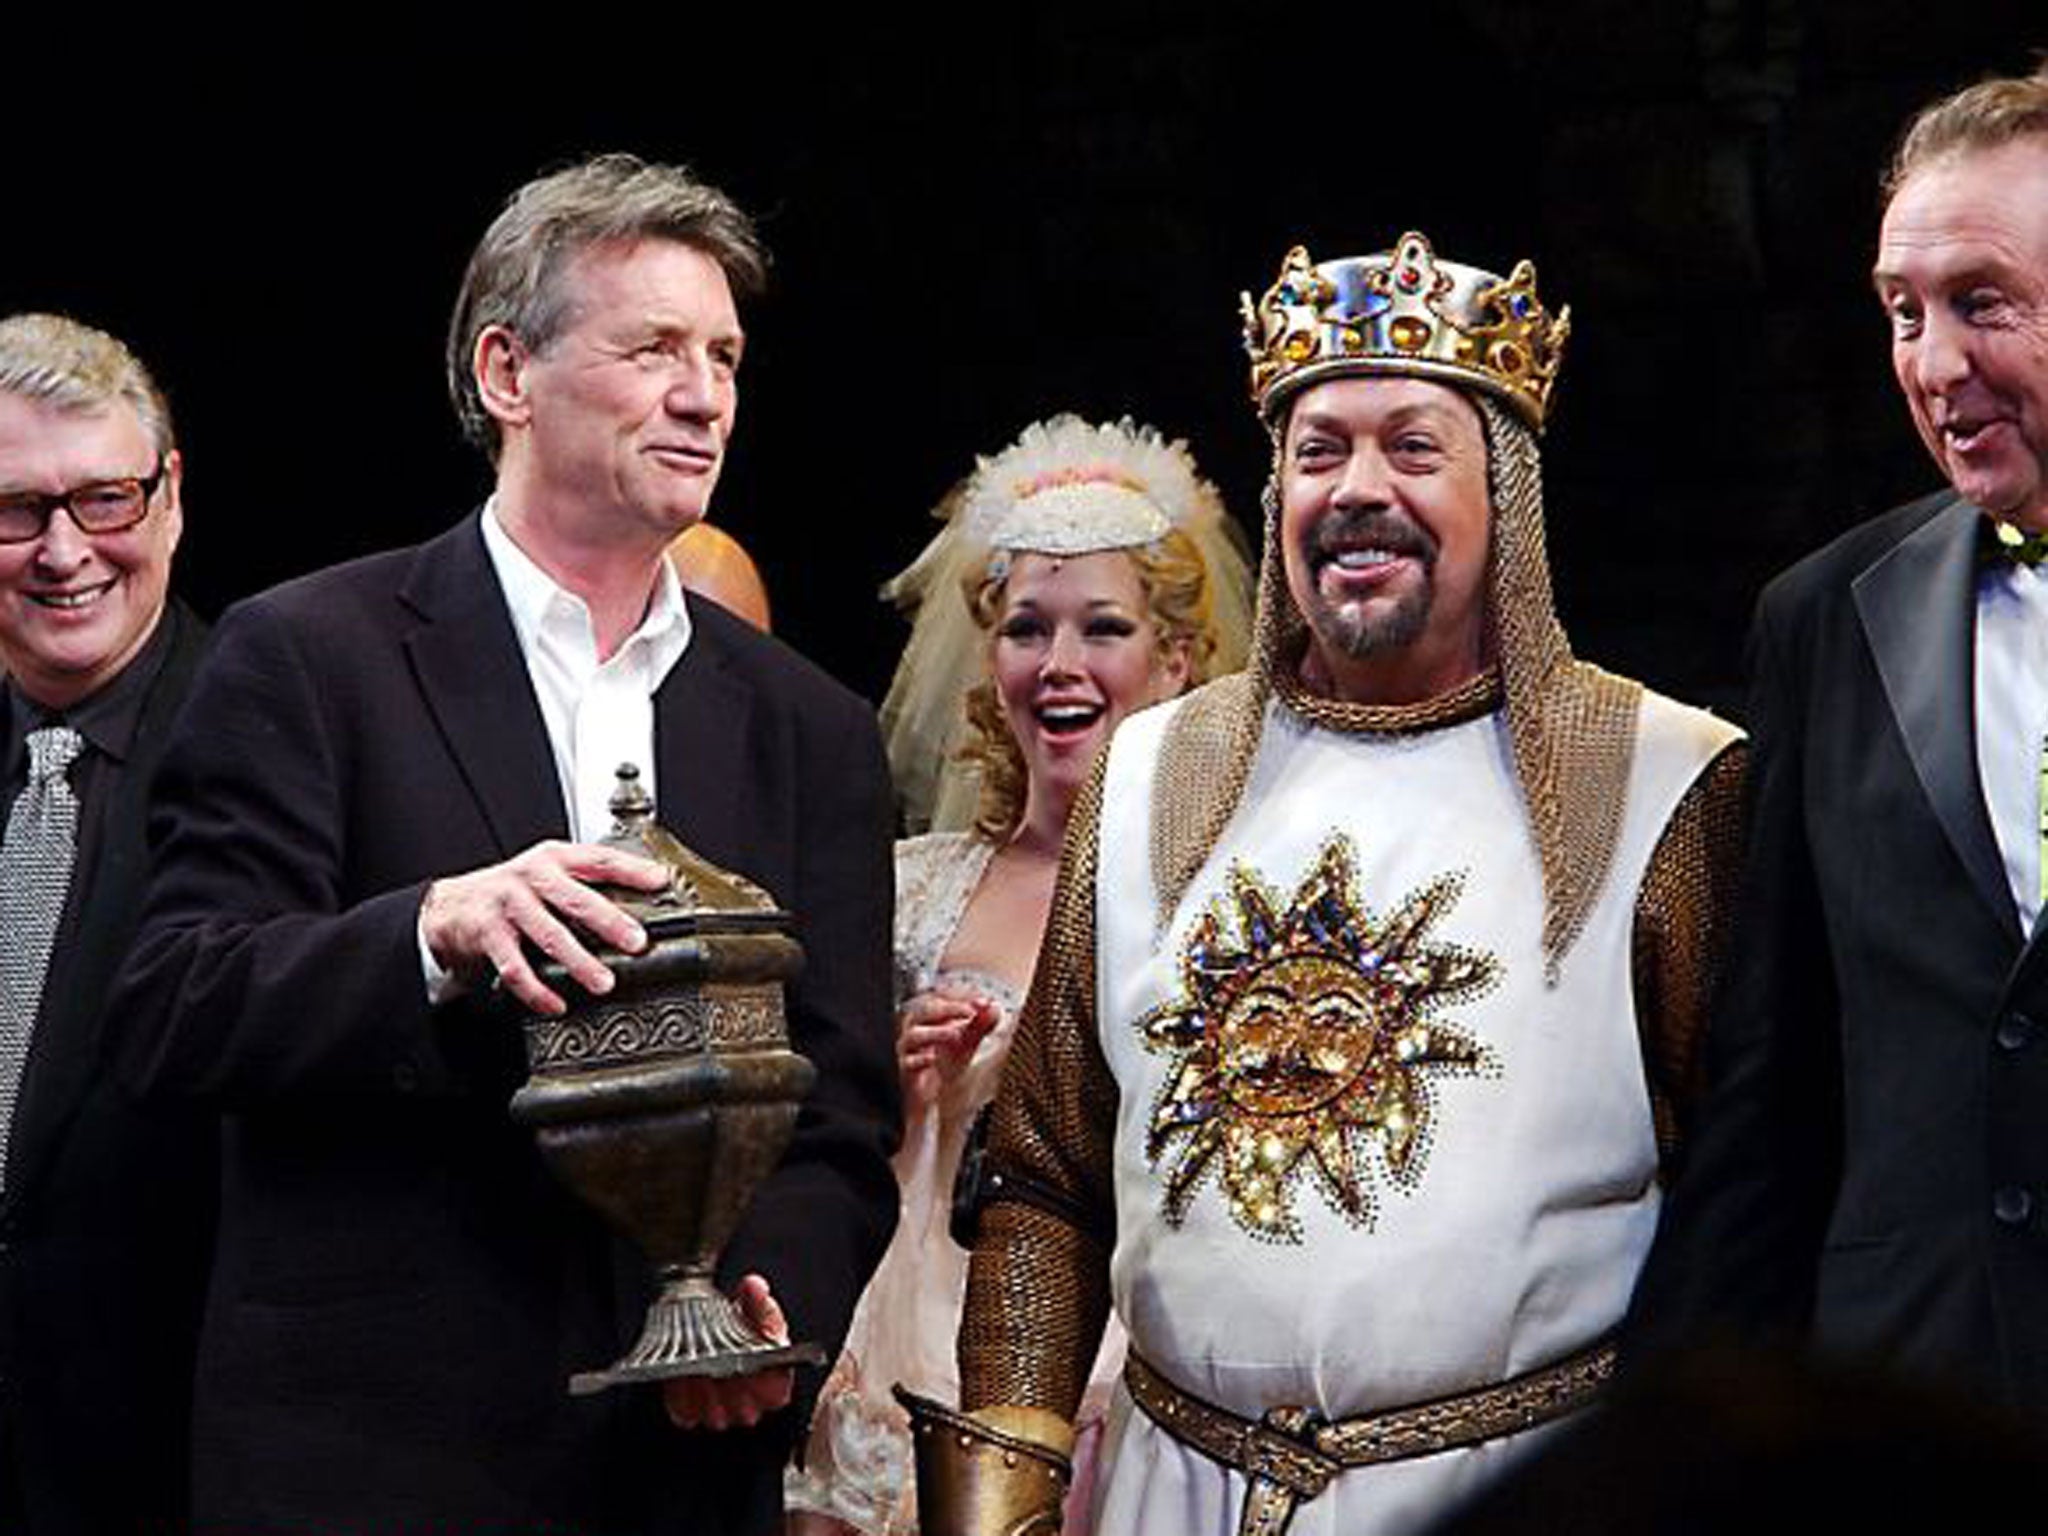 Michael Palin with Tim Curry and Eric Idle at the opening of Spamalot in New York in 2005